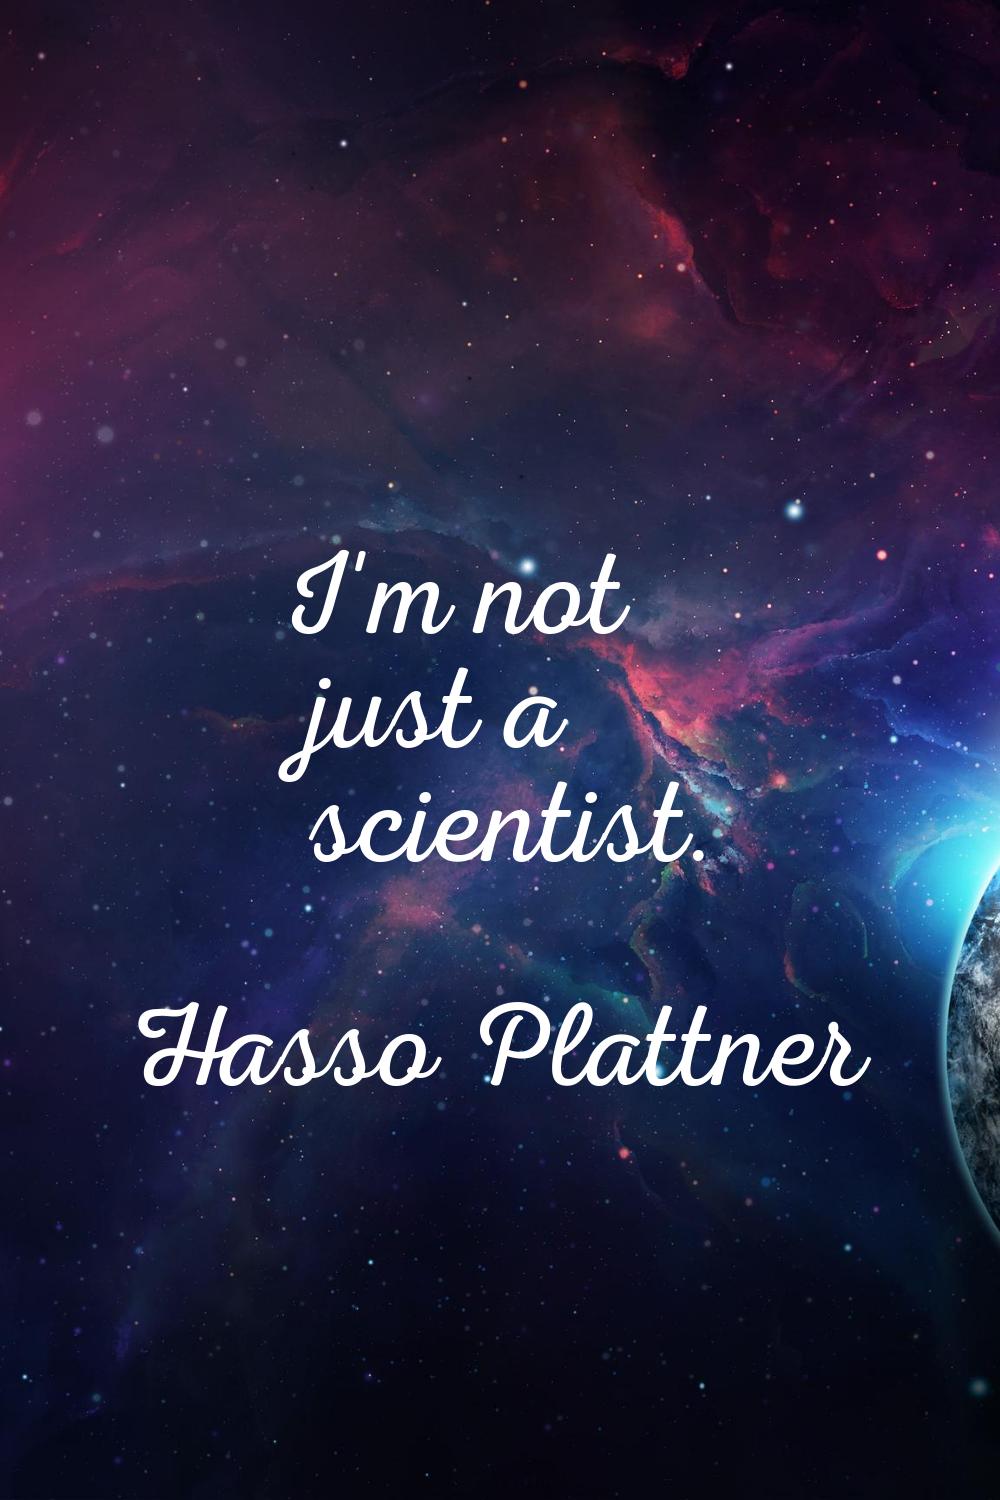 I'm not just a scientist.